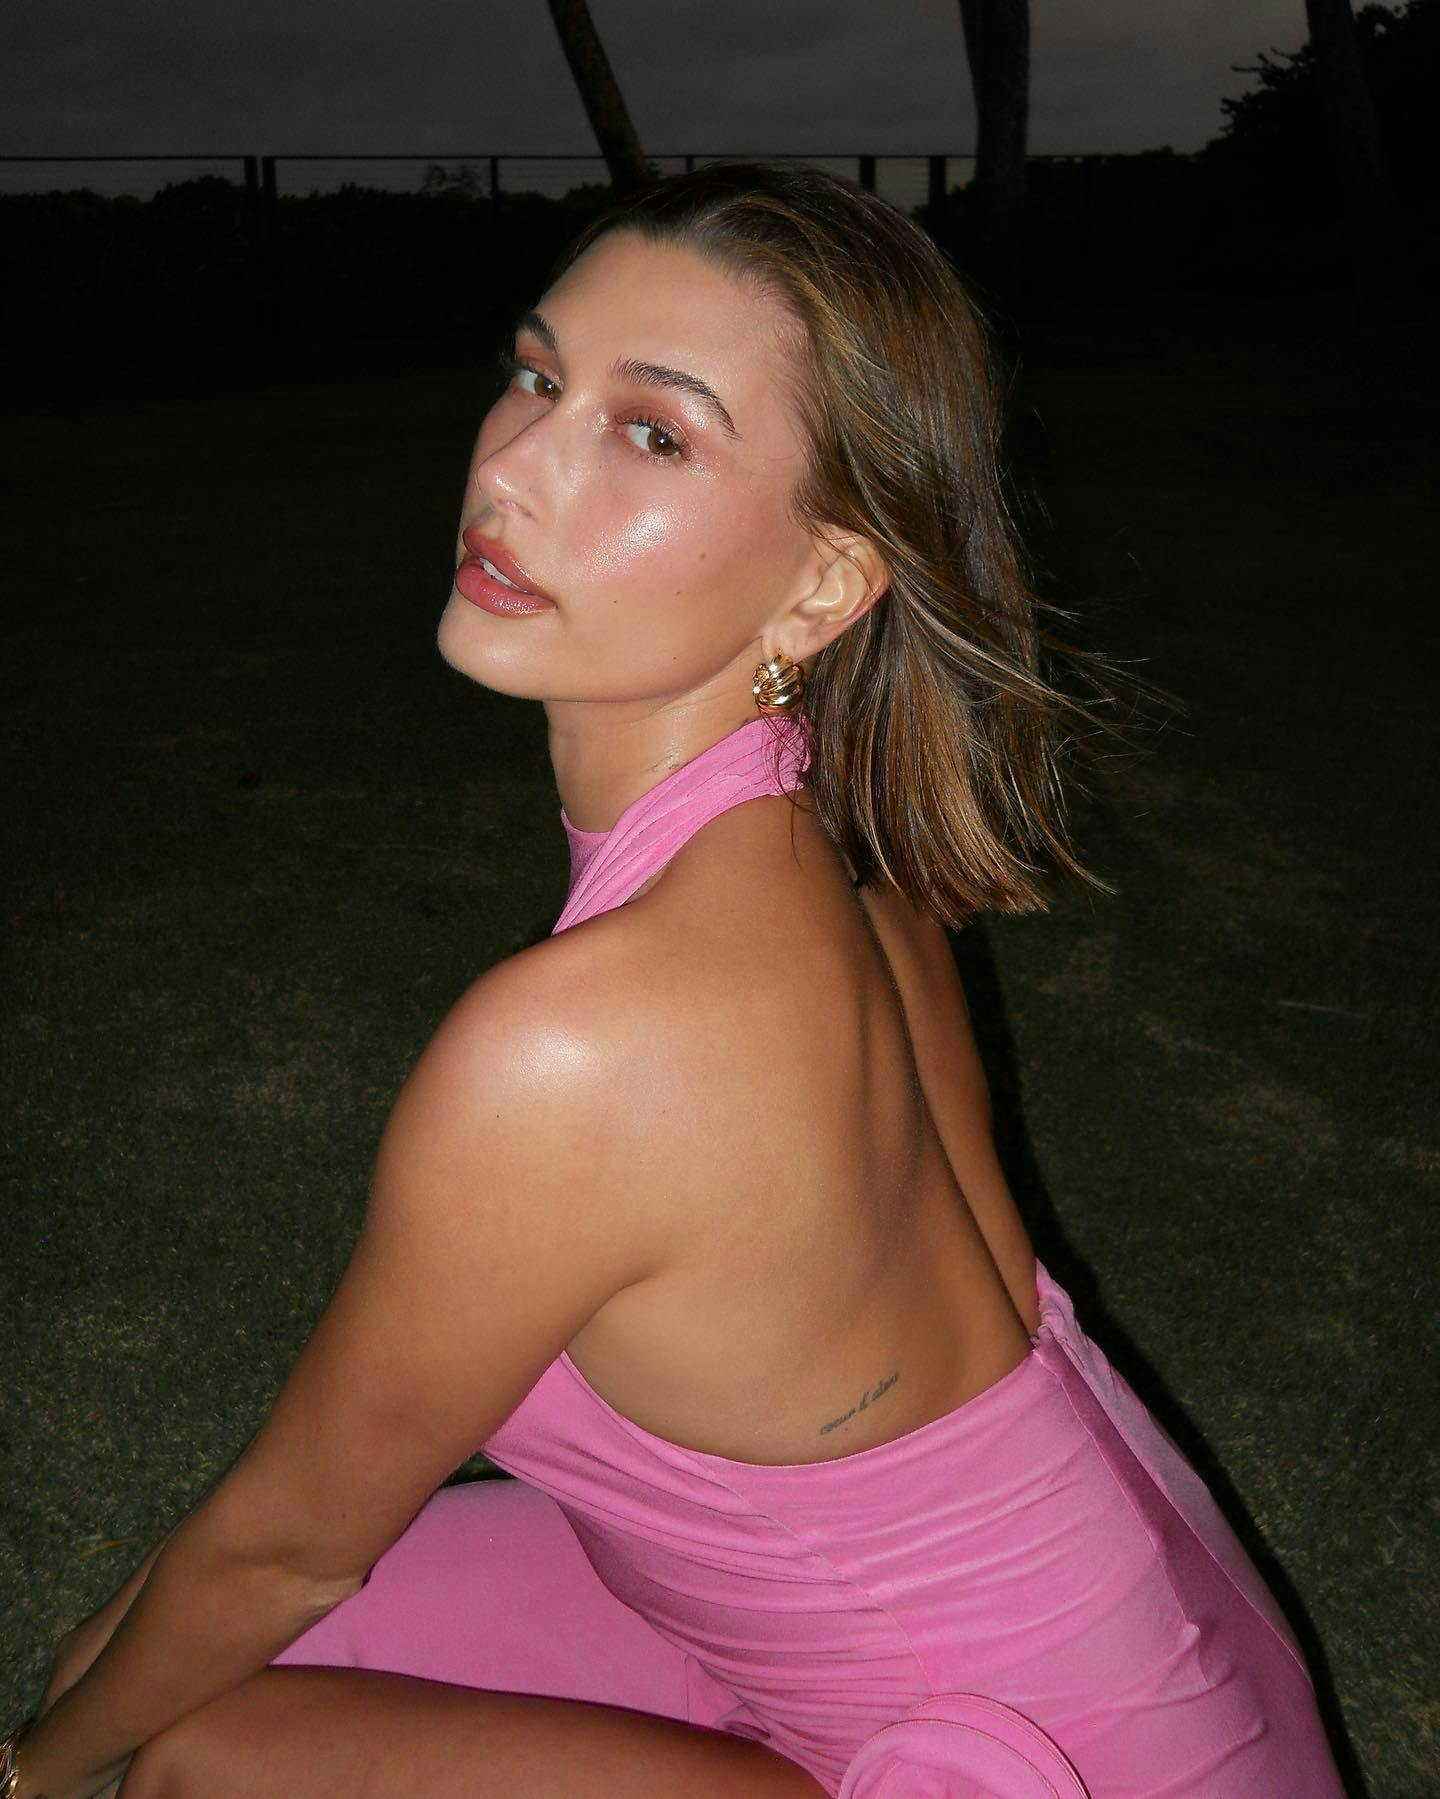 Woman in pink dress sitting on grass.